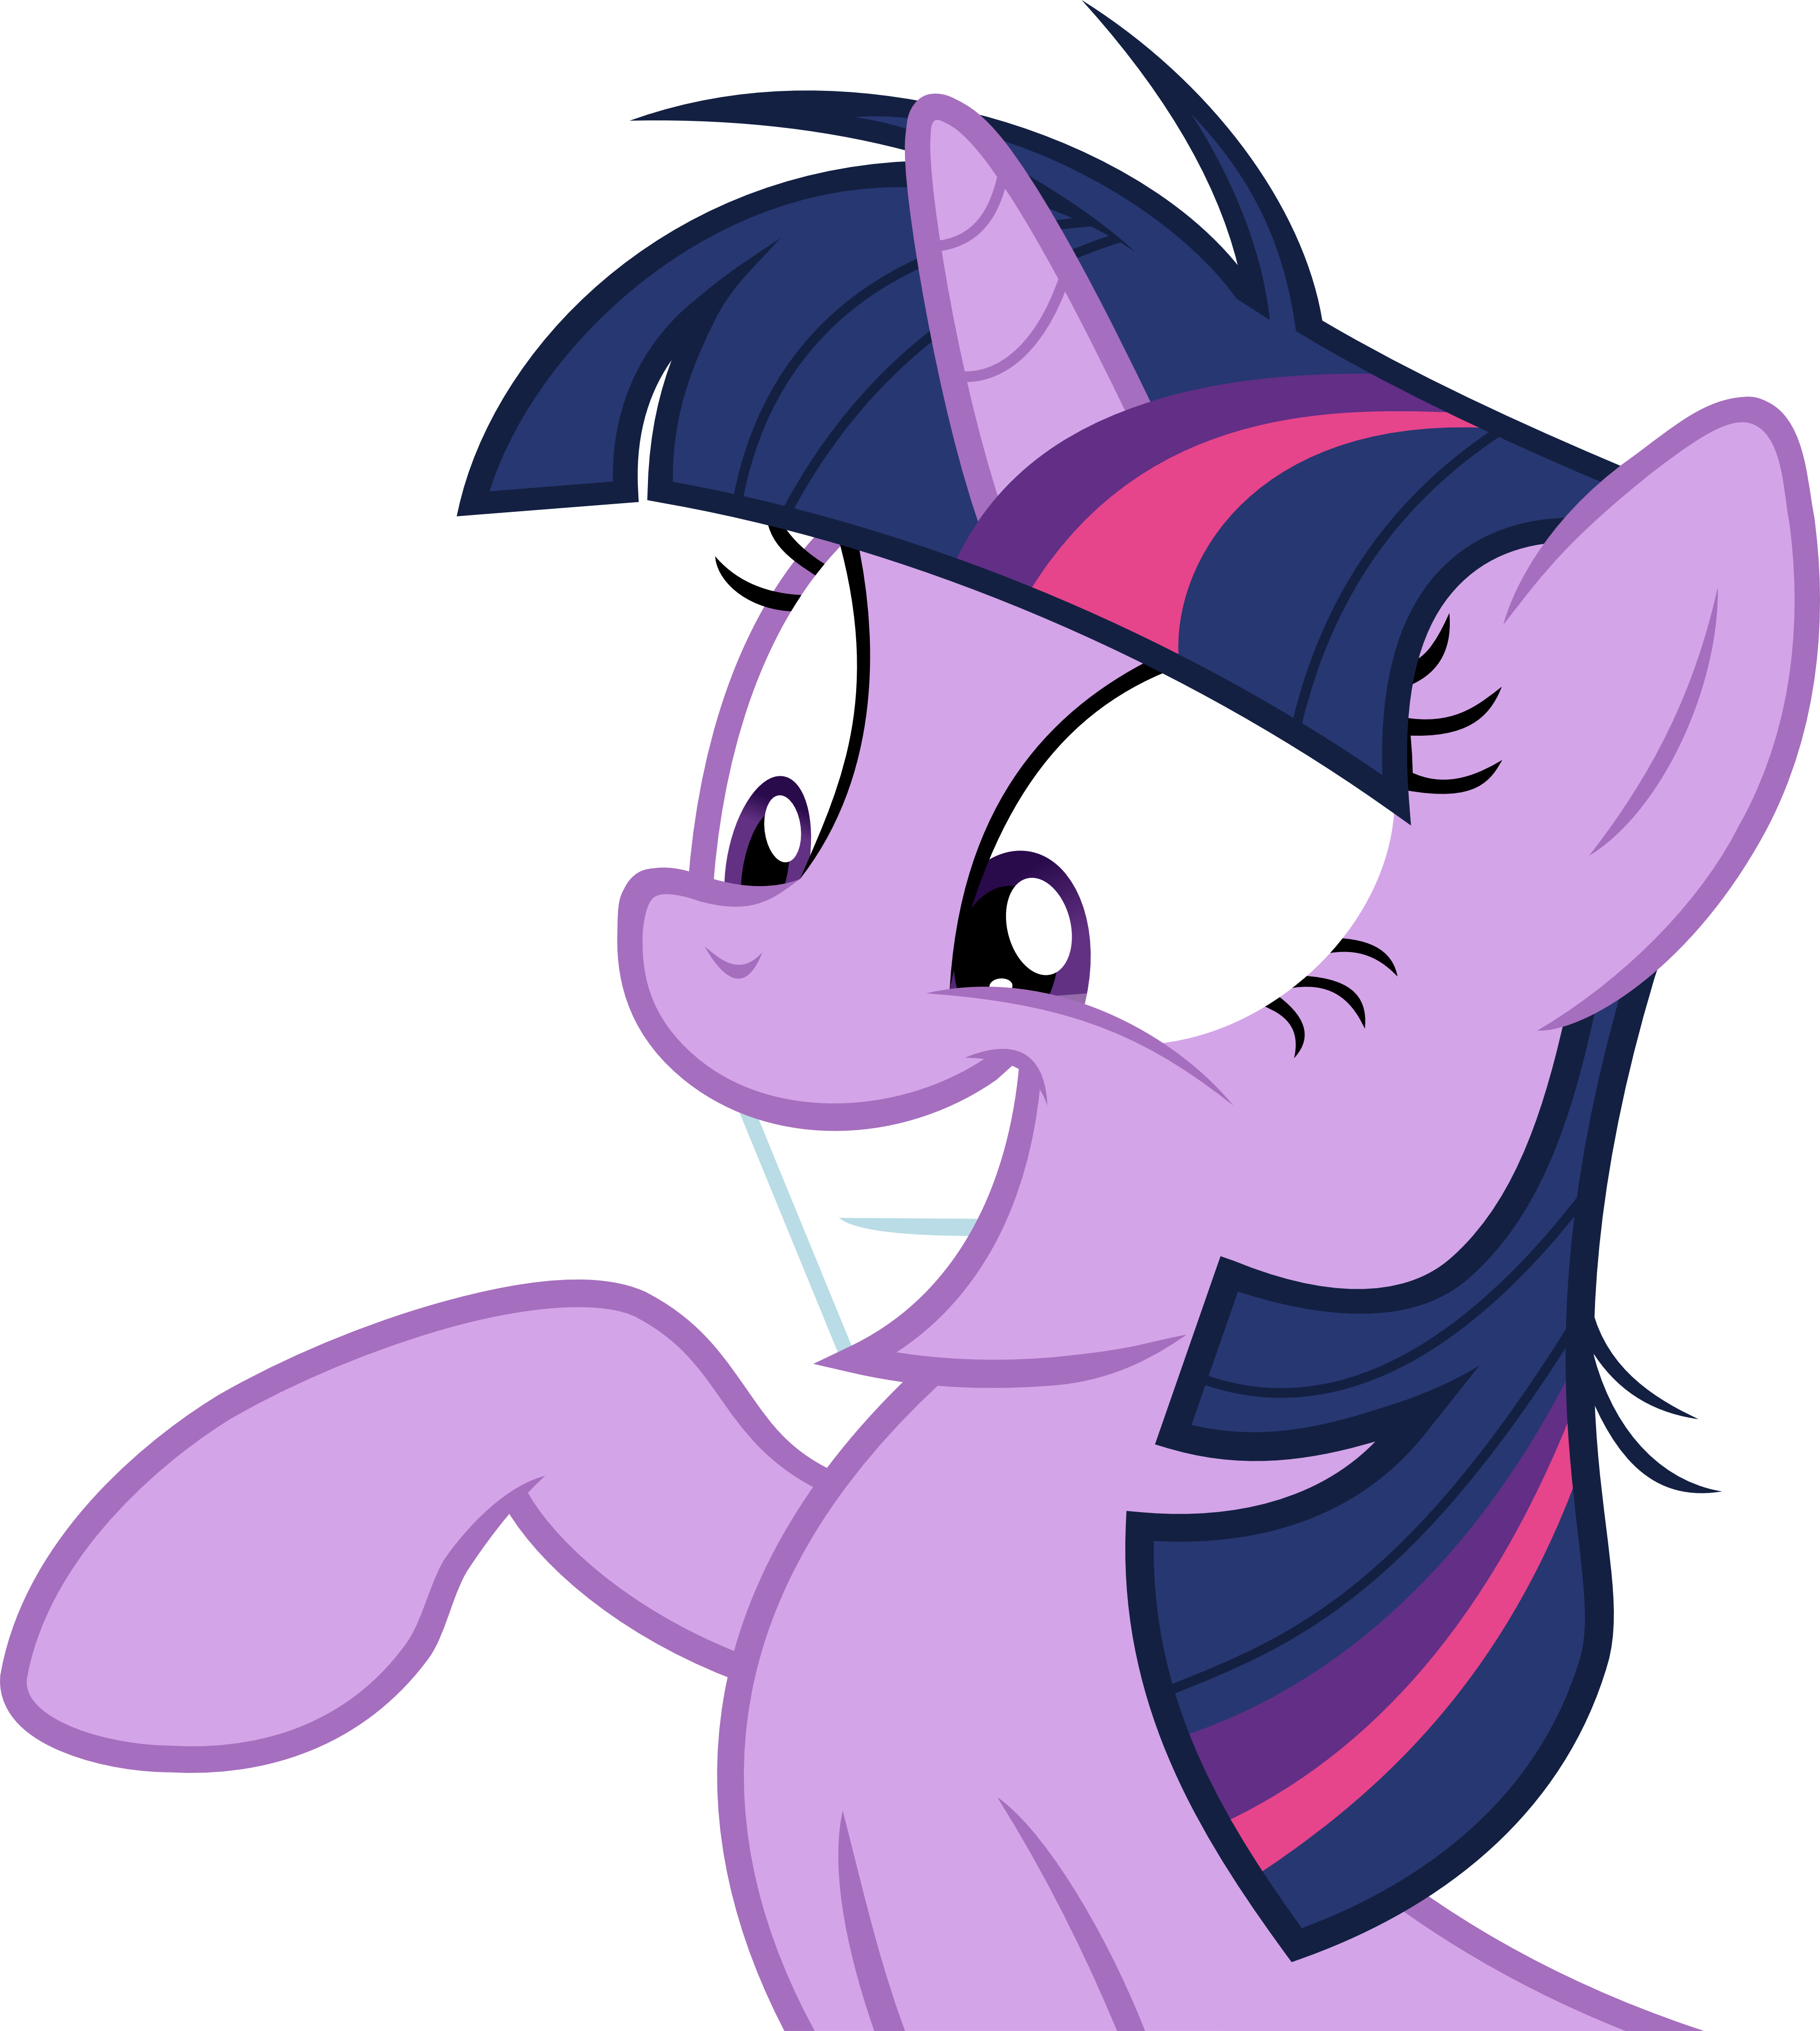 img-1918955-5-crazy_smiling_twilight_sparkle_vector_by_thorinair-d5es9dj.png